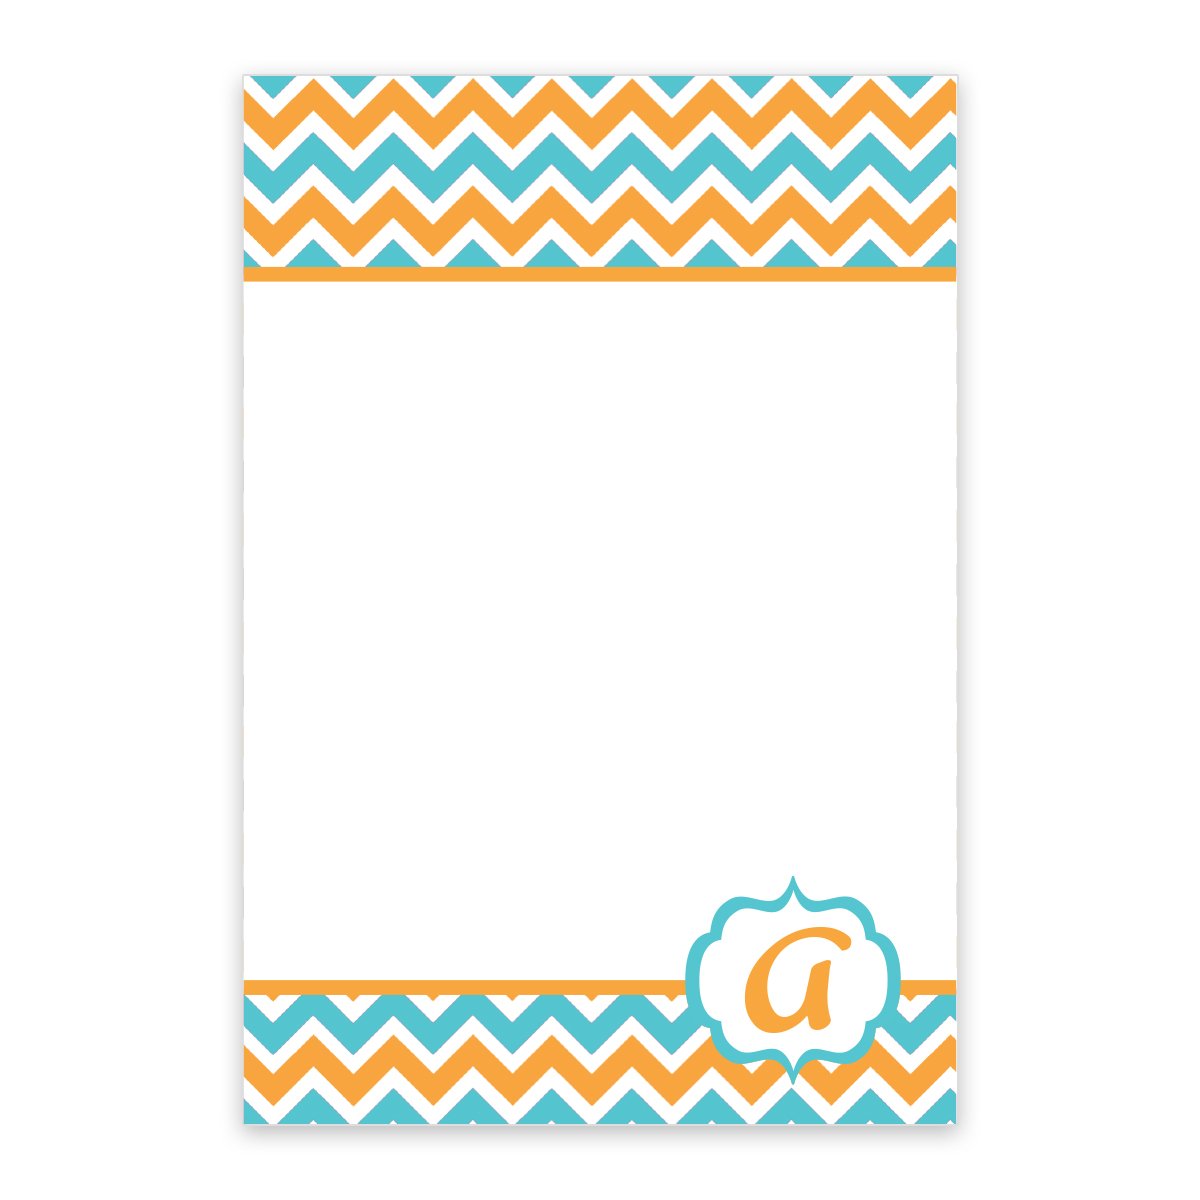 Teal and Orange Chevron Pattern Personalized Notepad